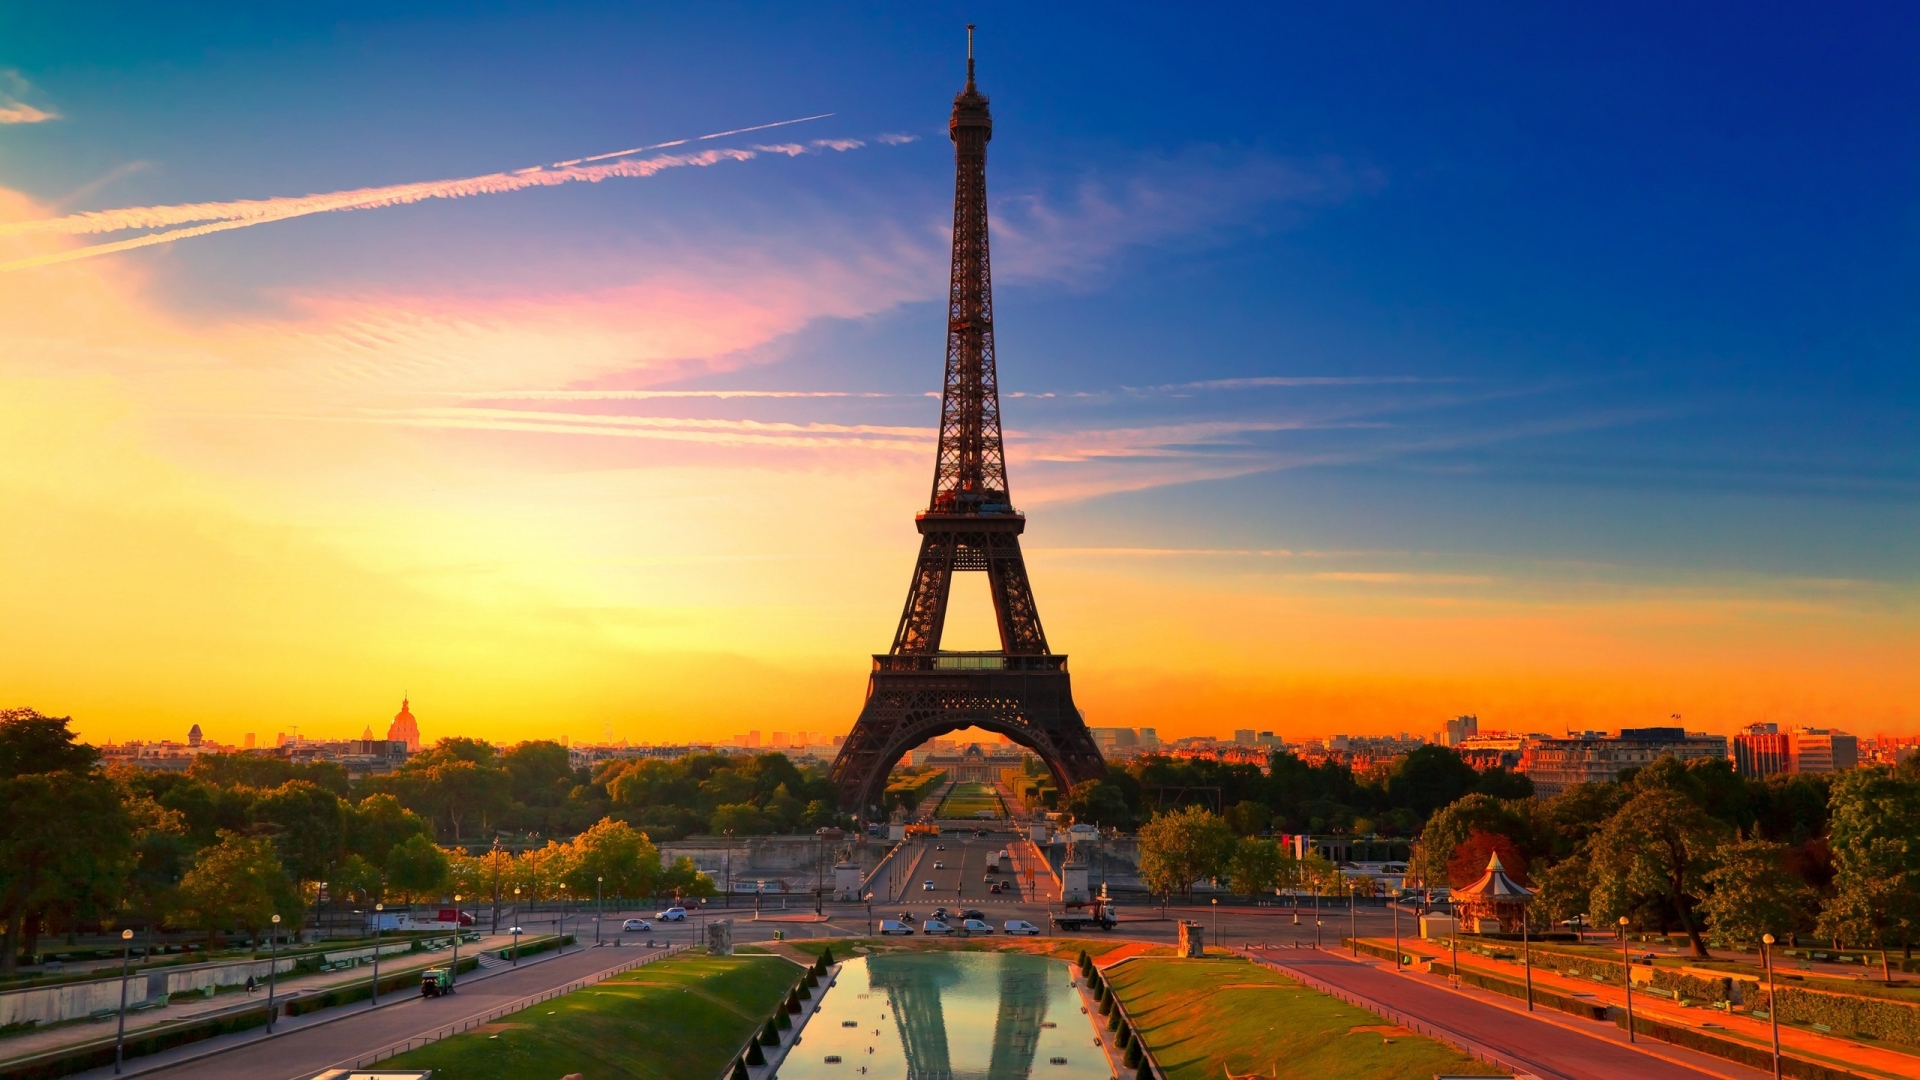 Sunset in Paris for 1920 x 1080 HDTV 1080p resolution